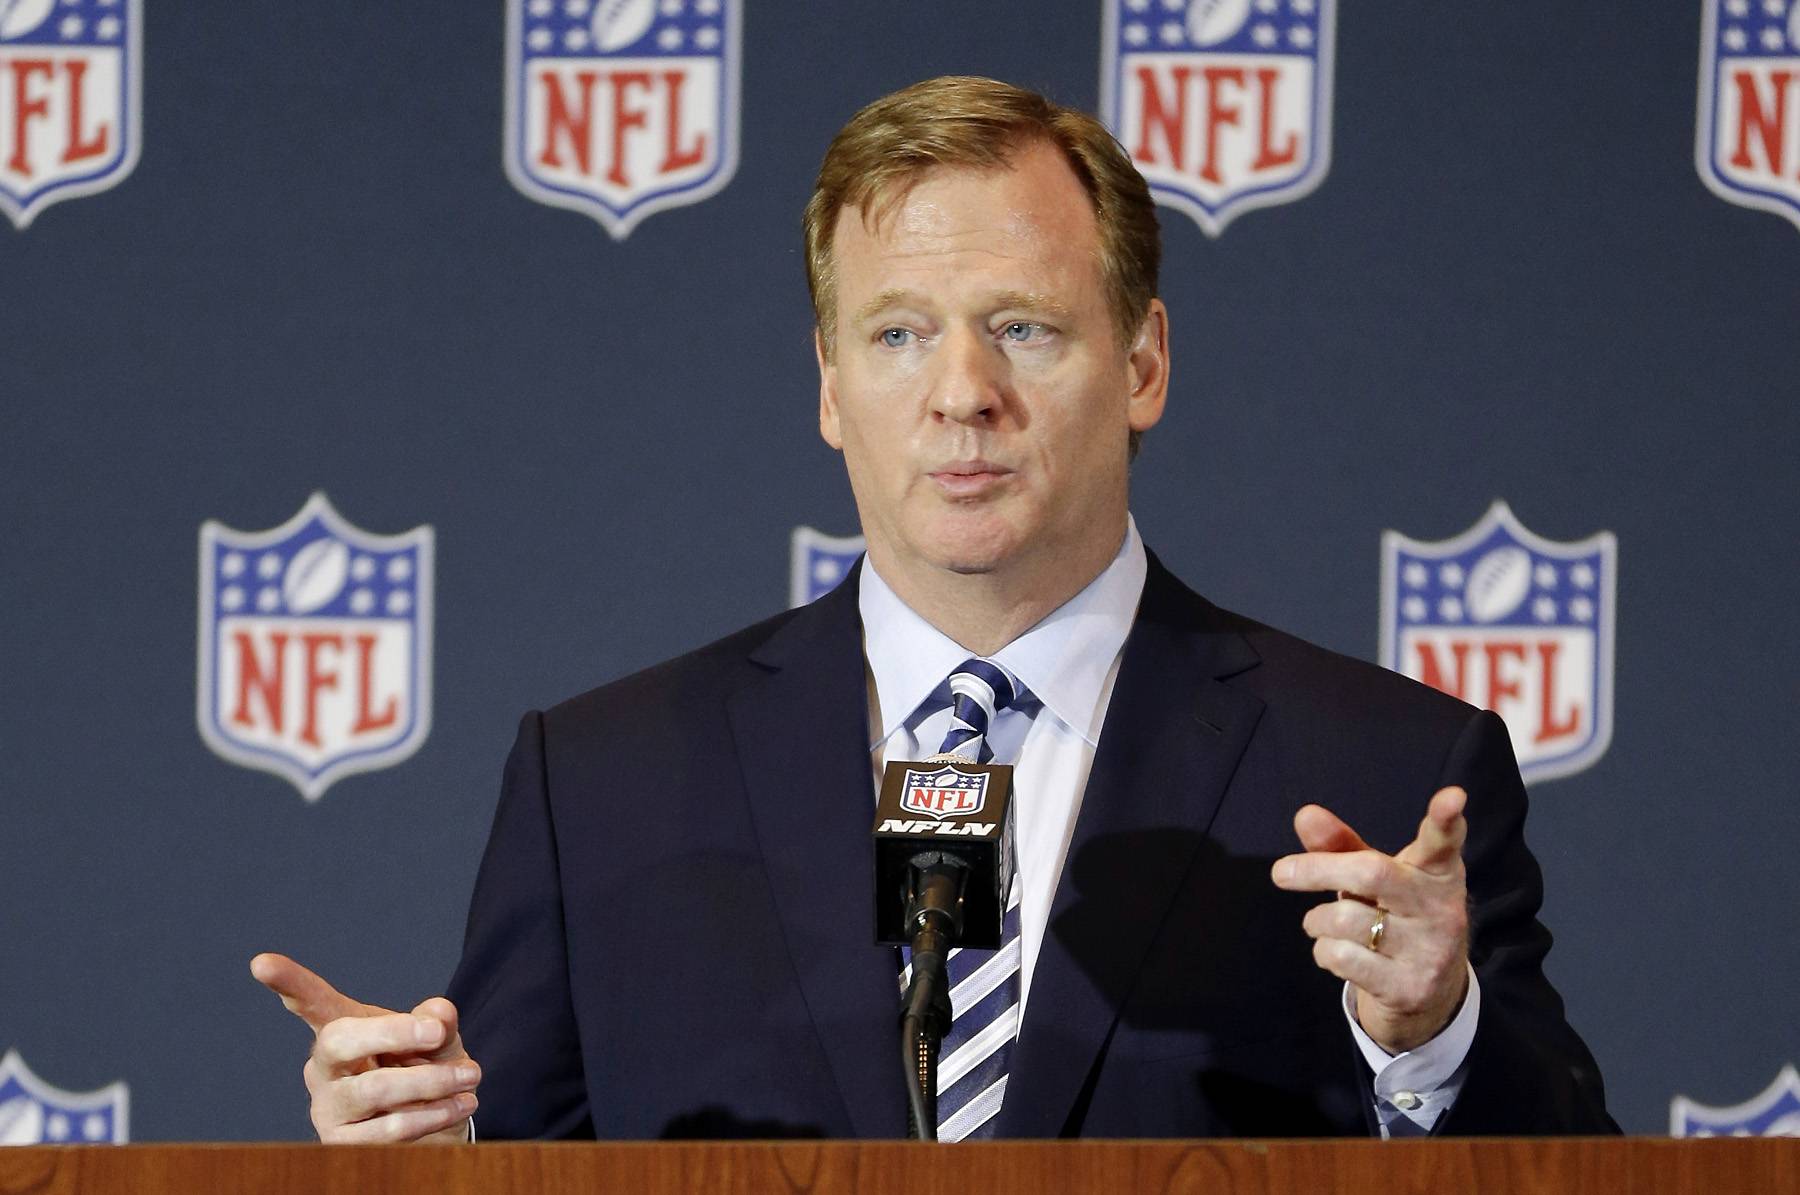 Roger Goodell More Likely to Resign Than Be Fired